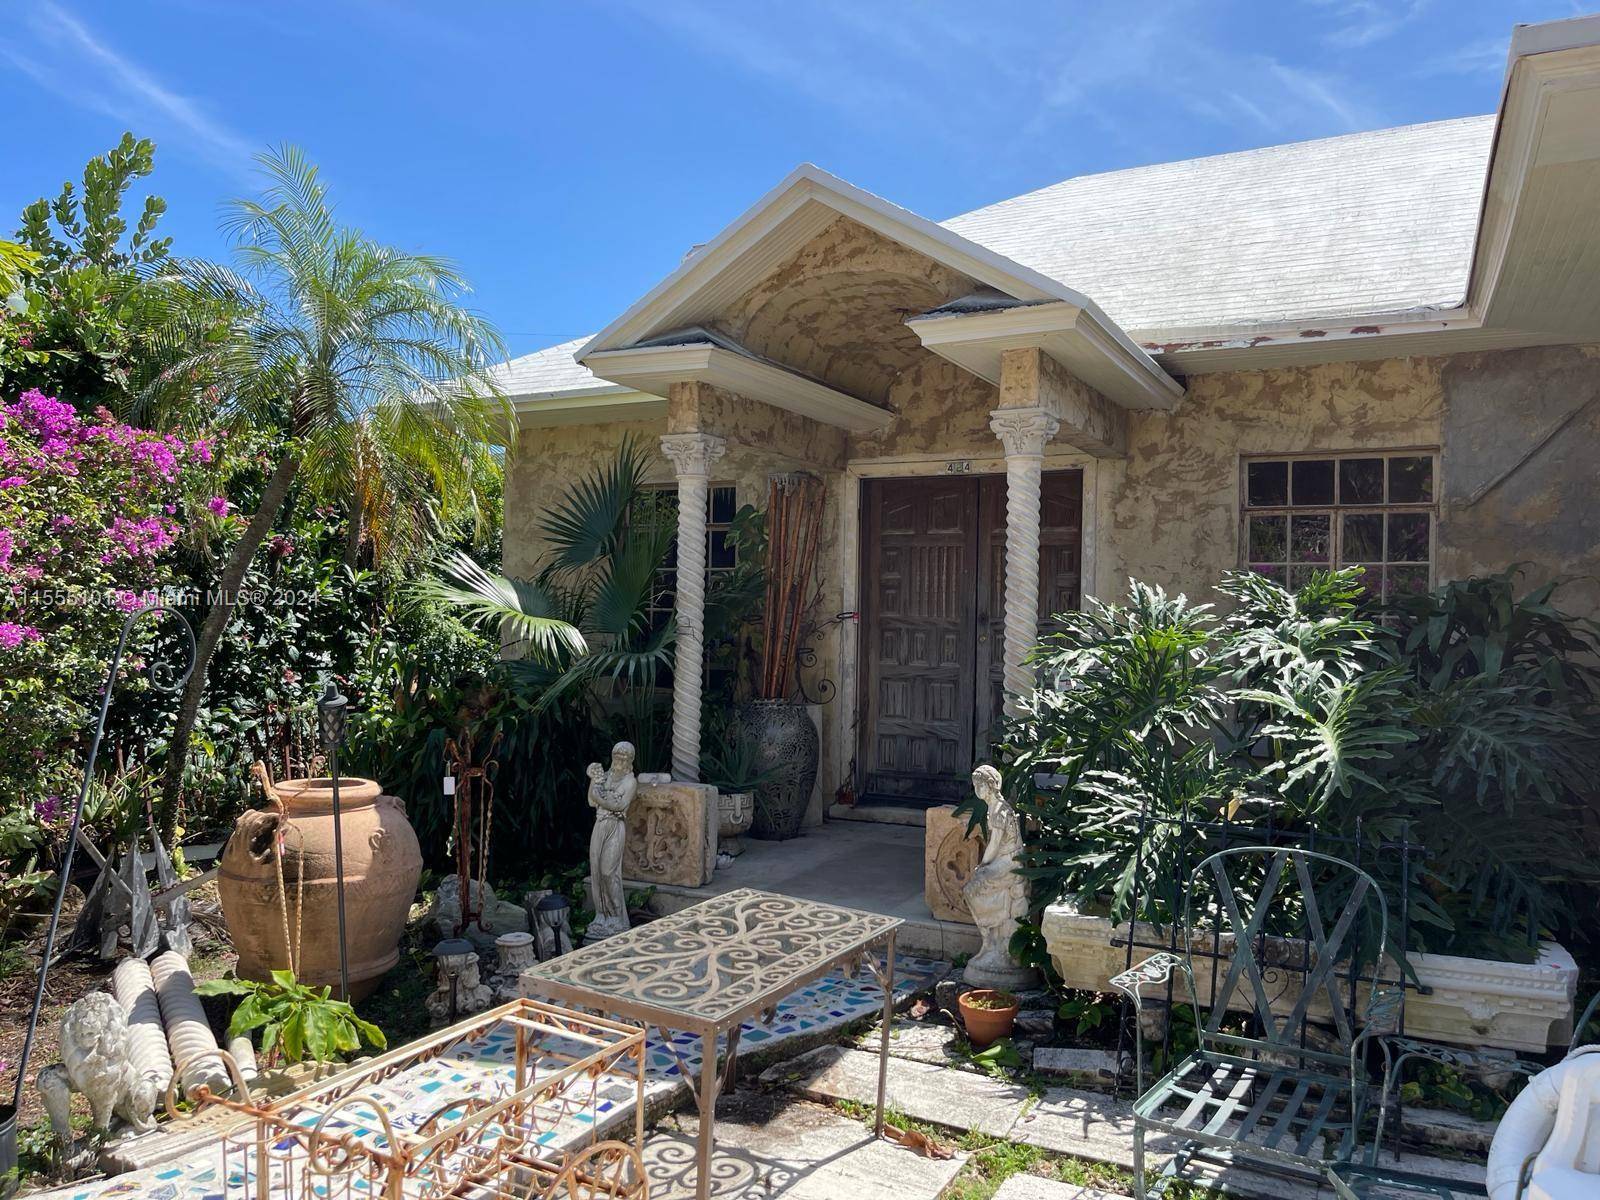 A Near Century Old diamond in the rough nestled in the heart of architectural history located adjacent to the former site of Addison Mizner s famed workshops.